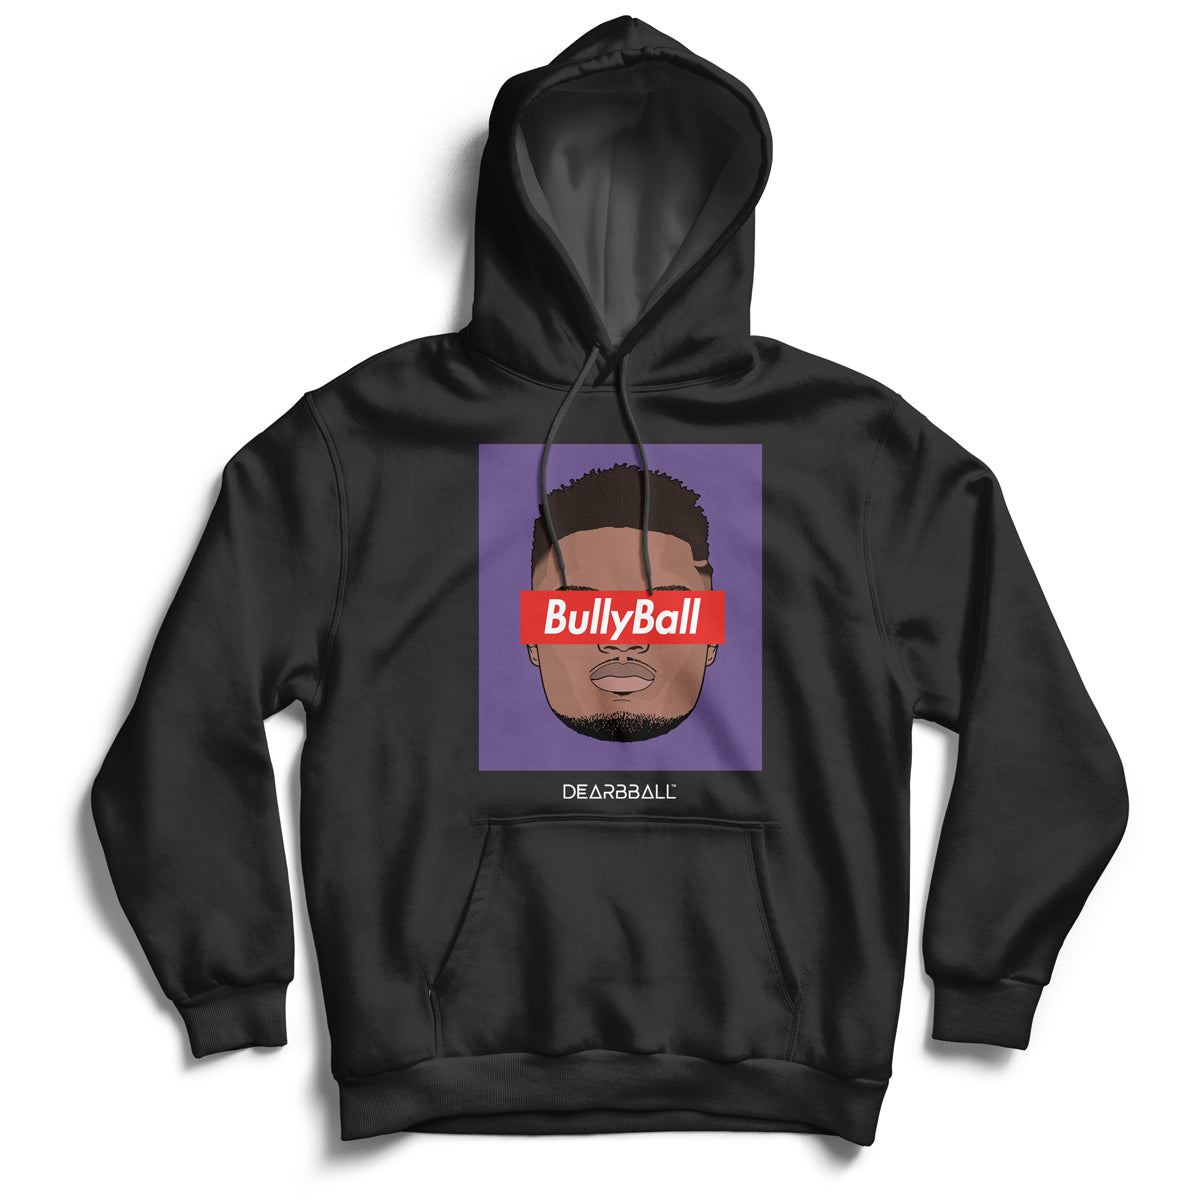 Zion_Williamson_hoodie_BULLYBALL_New_Orleans_Pelicans_Dearbball_black